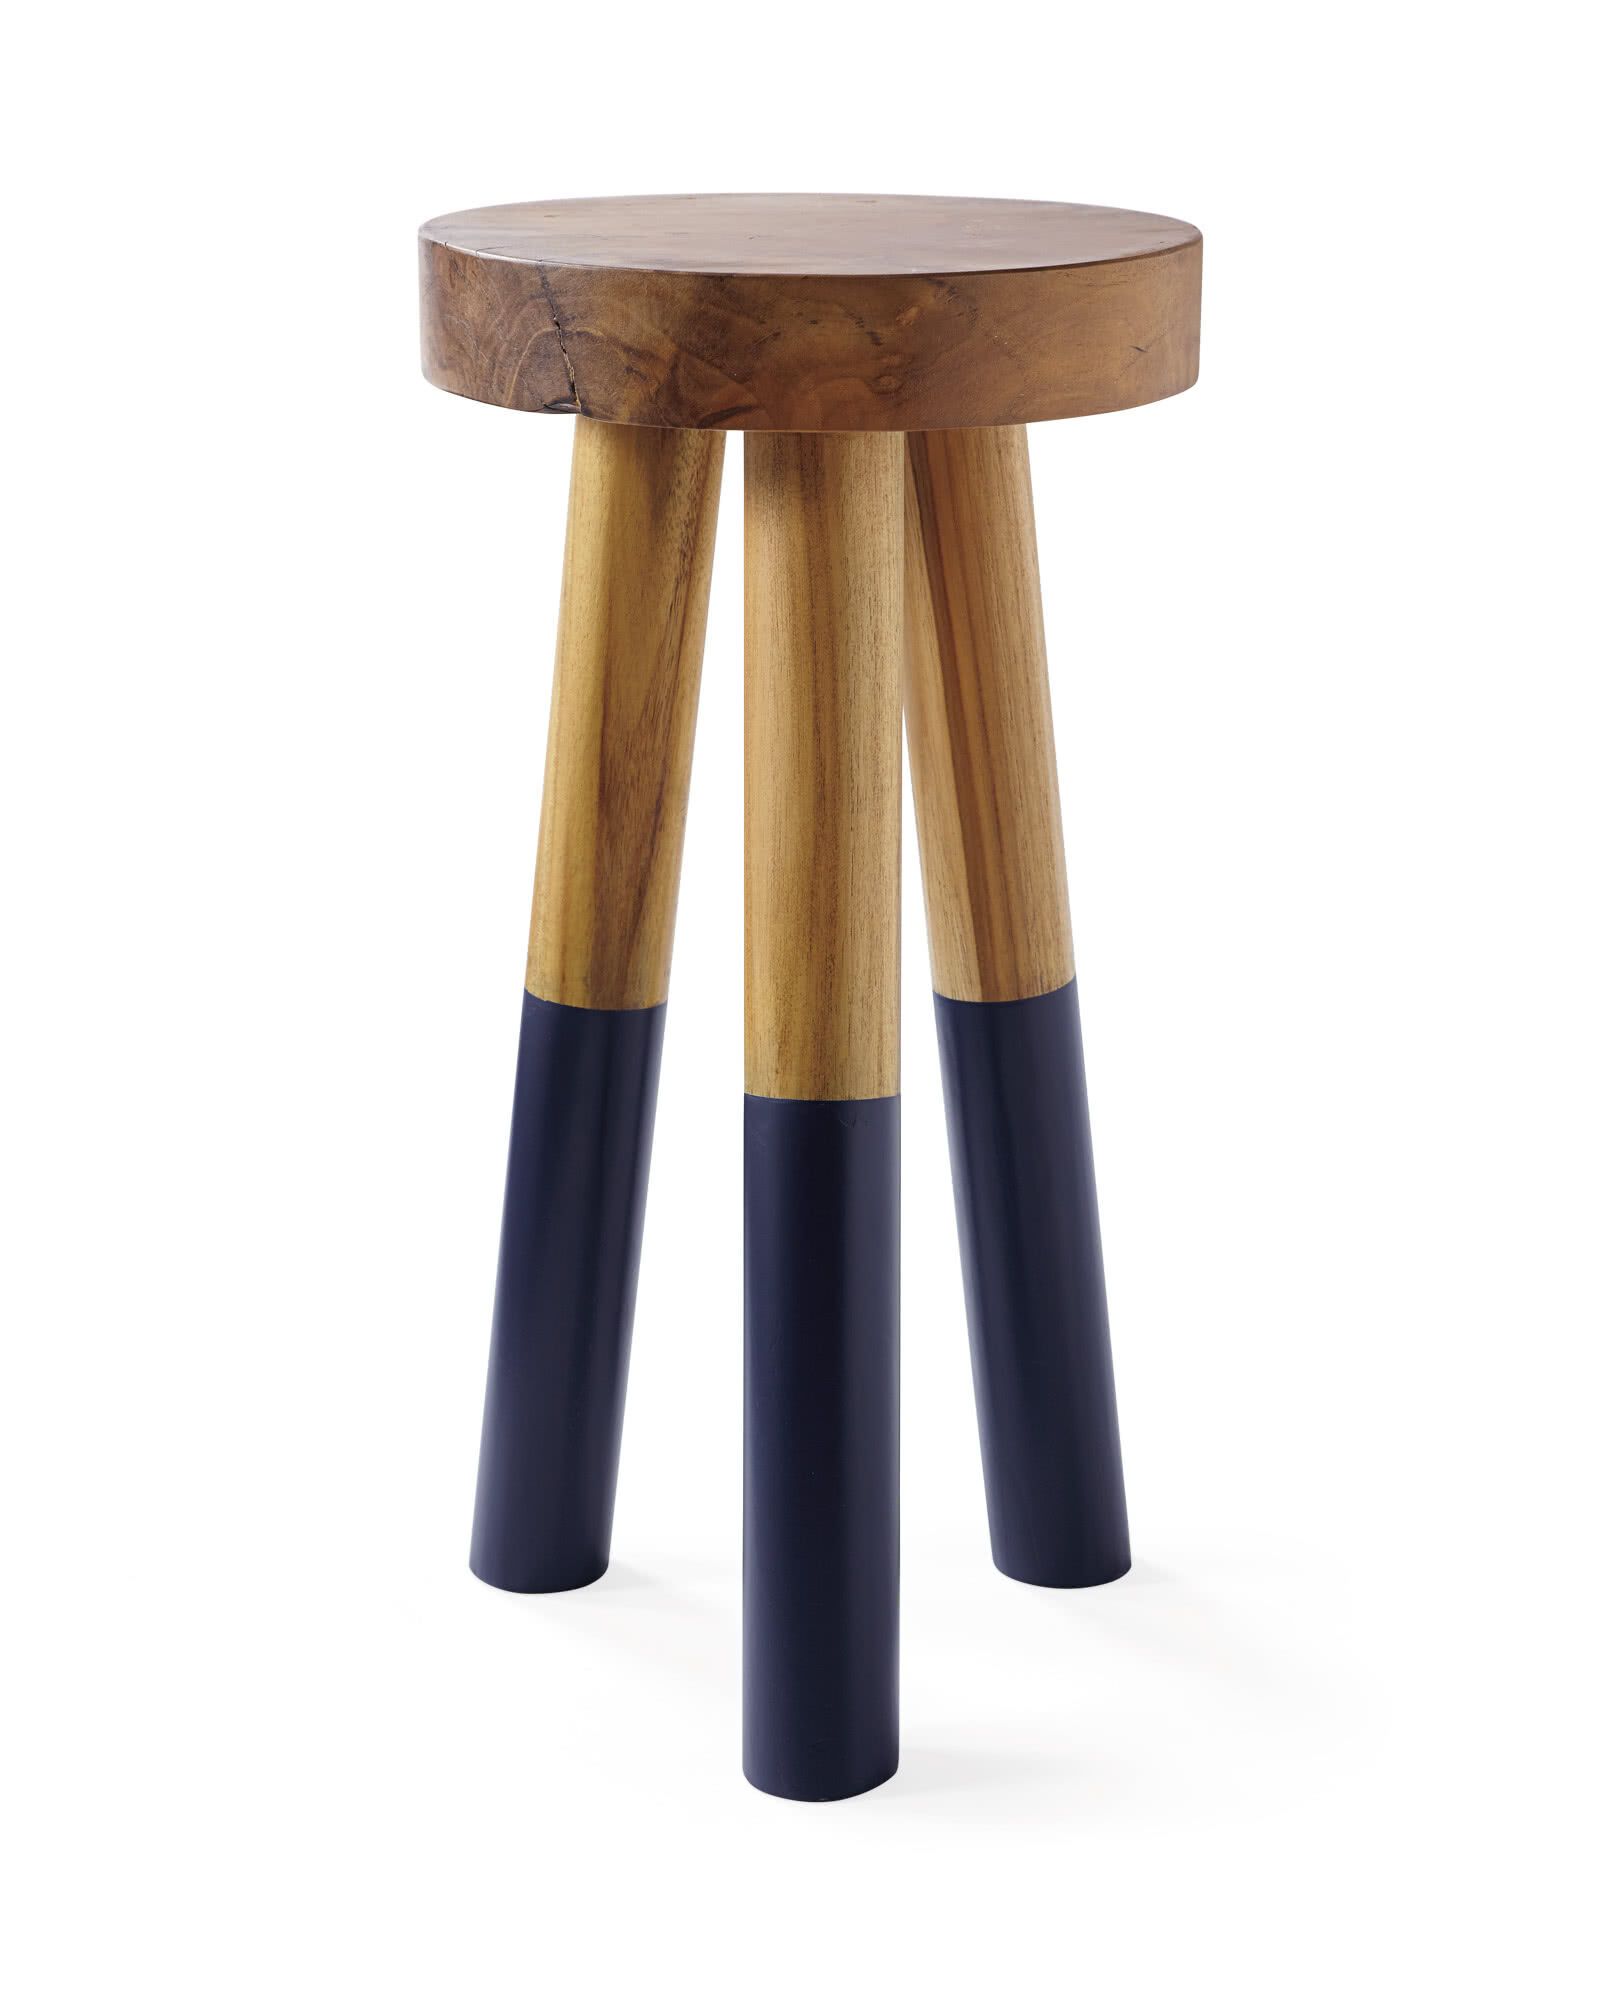 Dip-Dyed Stools | Serena and Lily